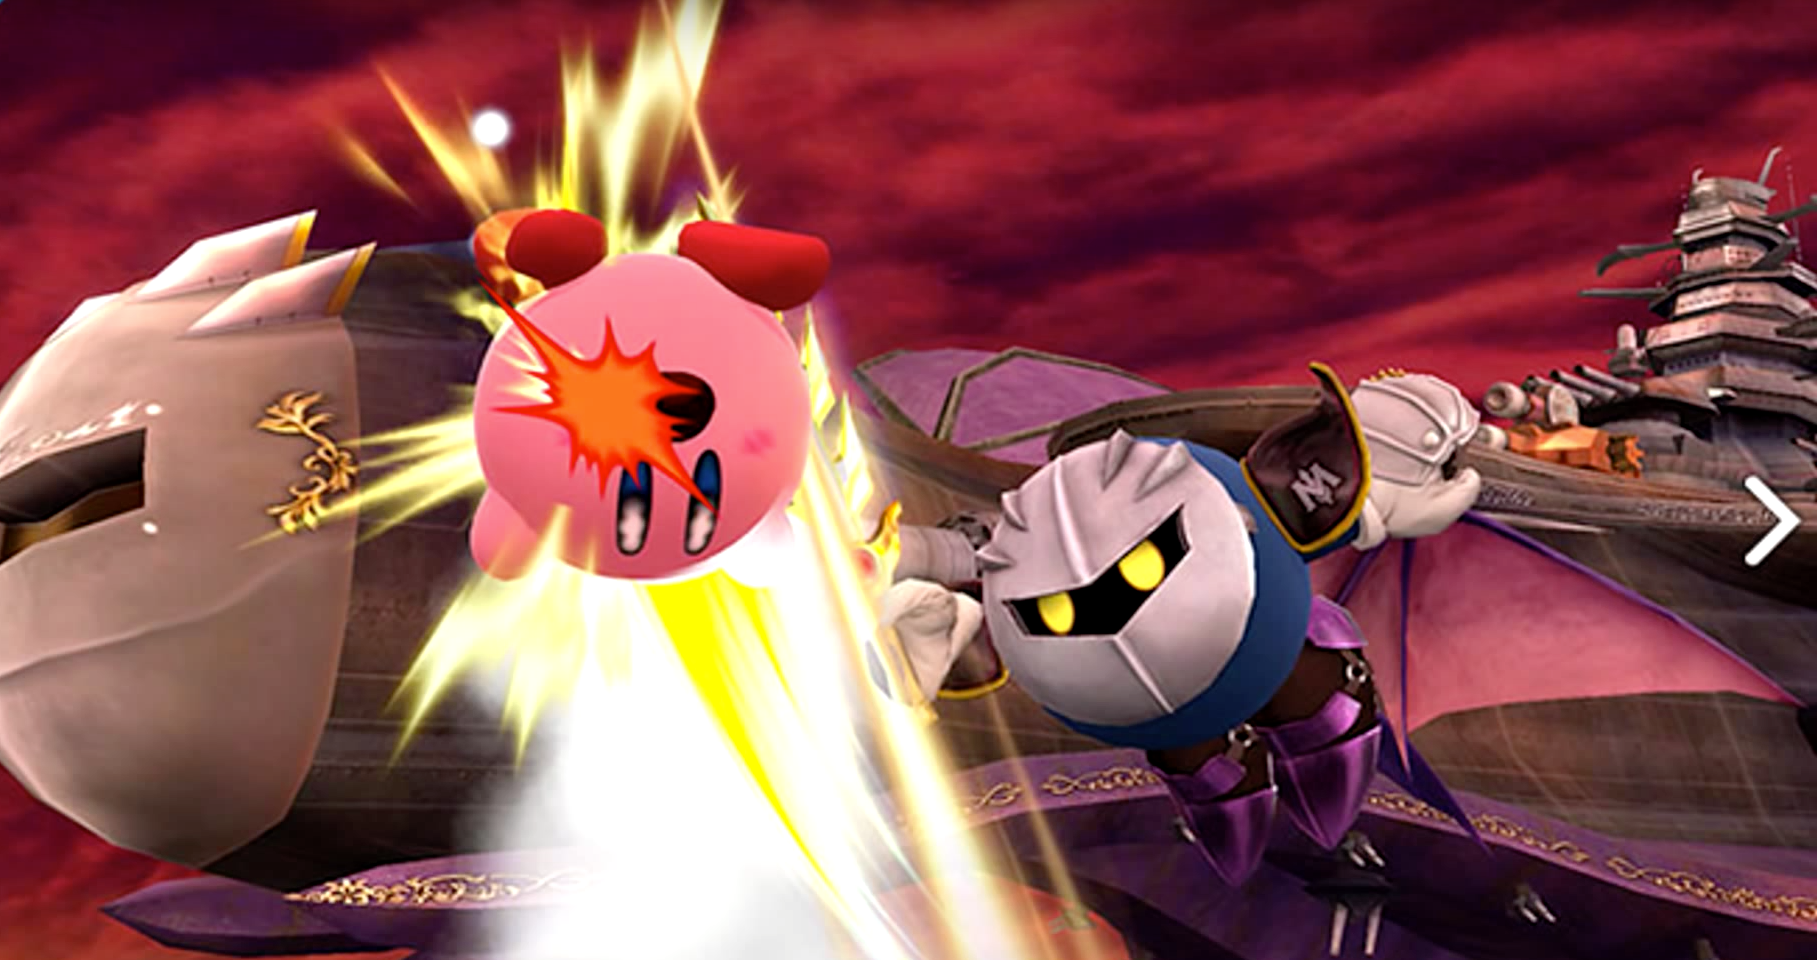 Burnt-Out Smash Pros Are Talking About Unionising